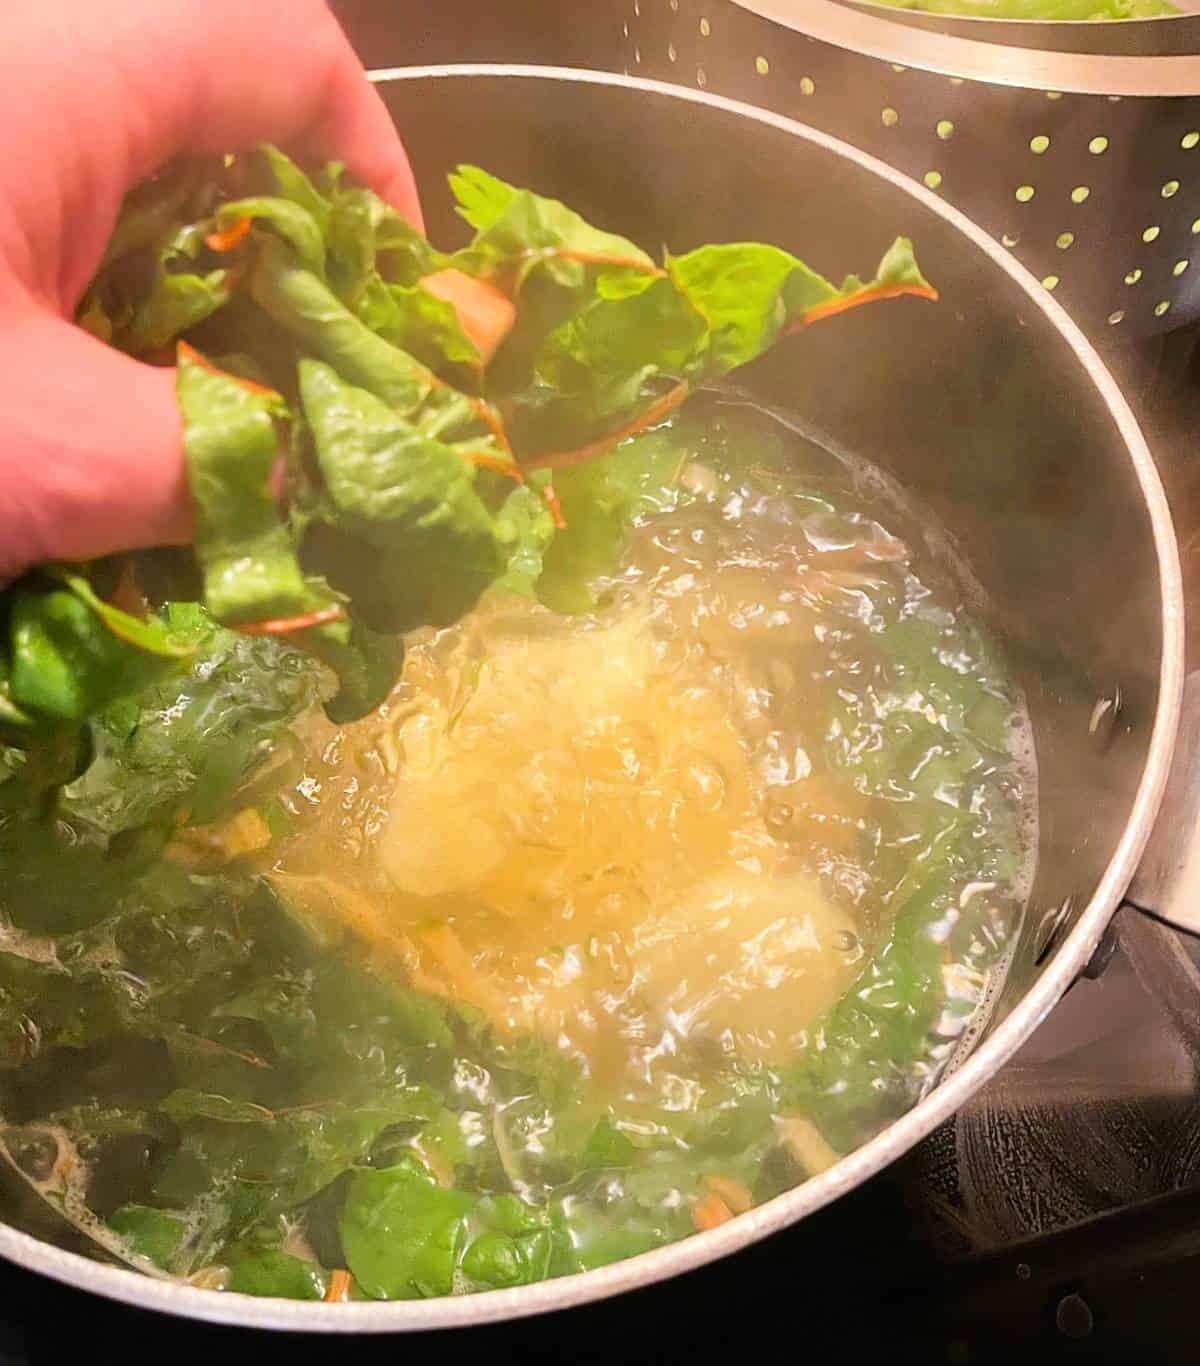 adding chard leaves to a pot of boiling water.